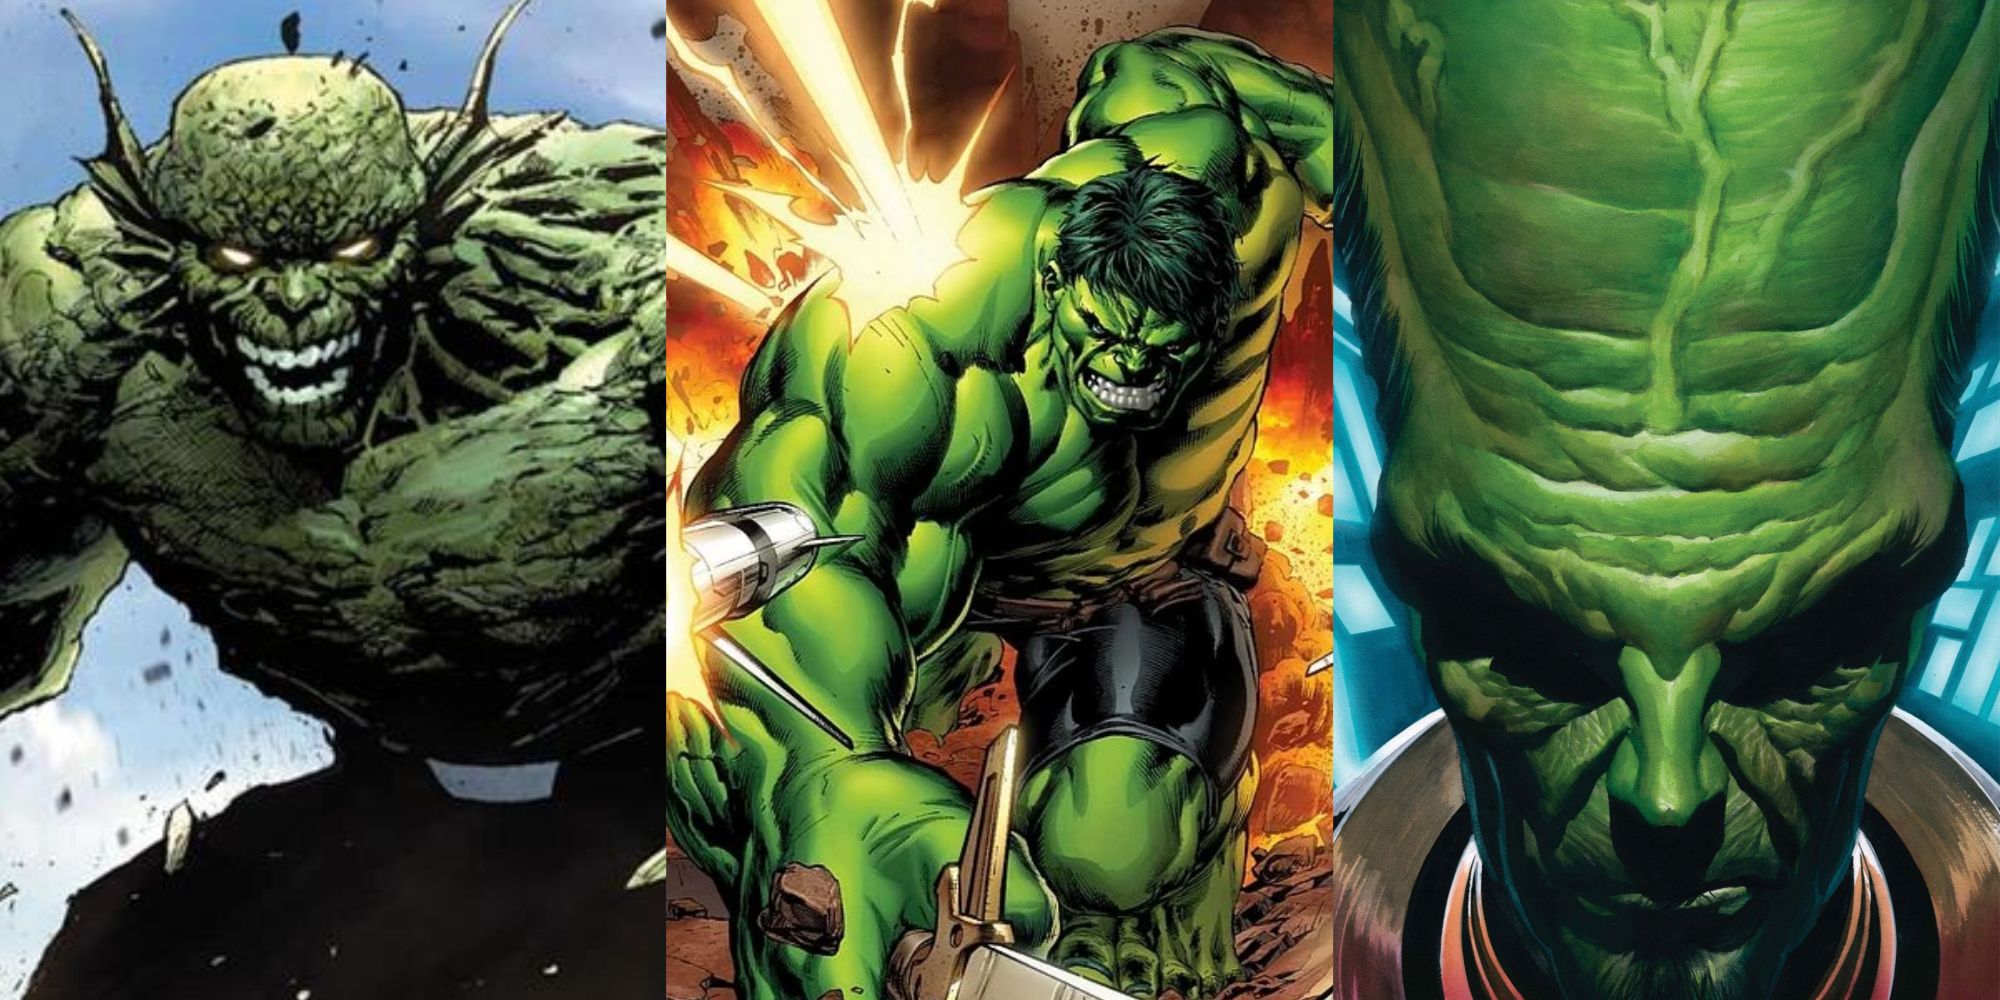 Split image of Abomination, the Hulk, and the Leader from Marvel Comics.